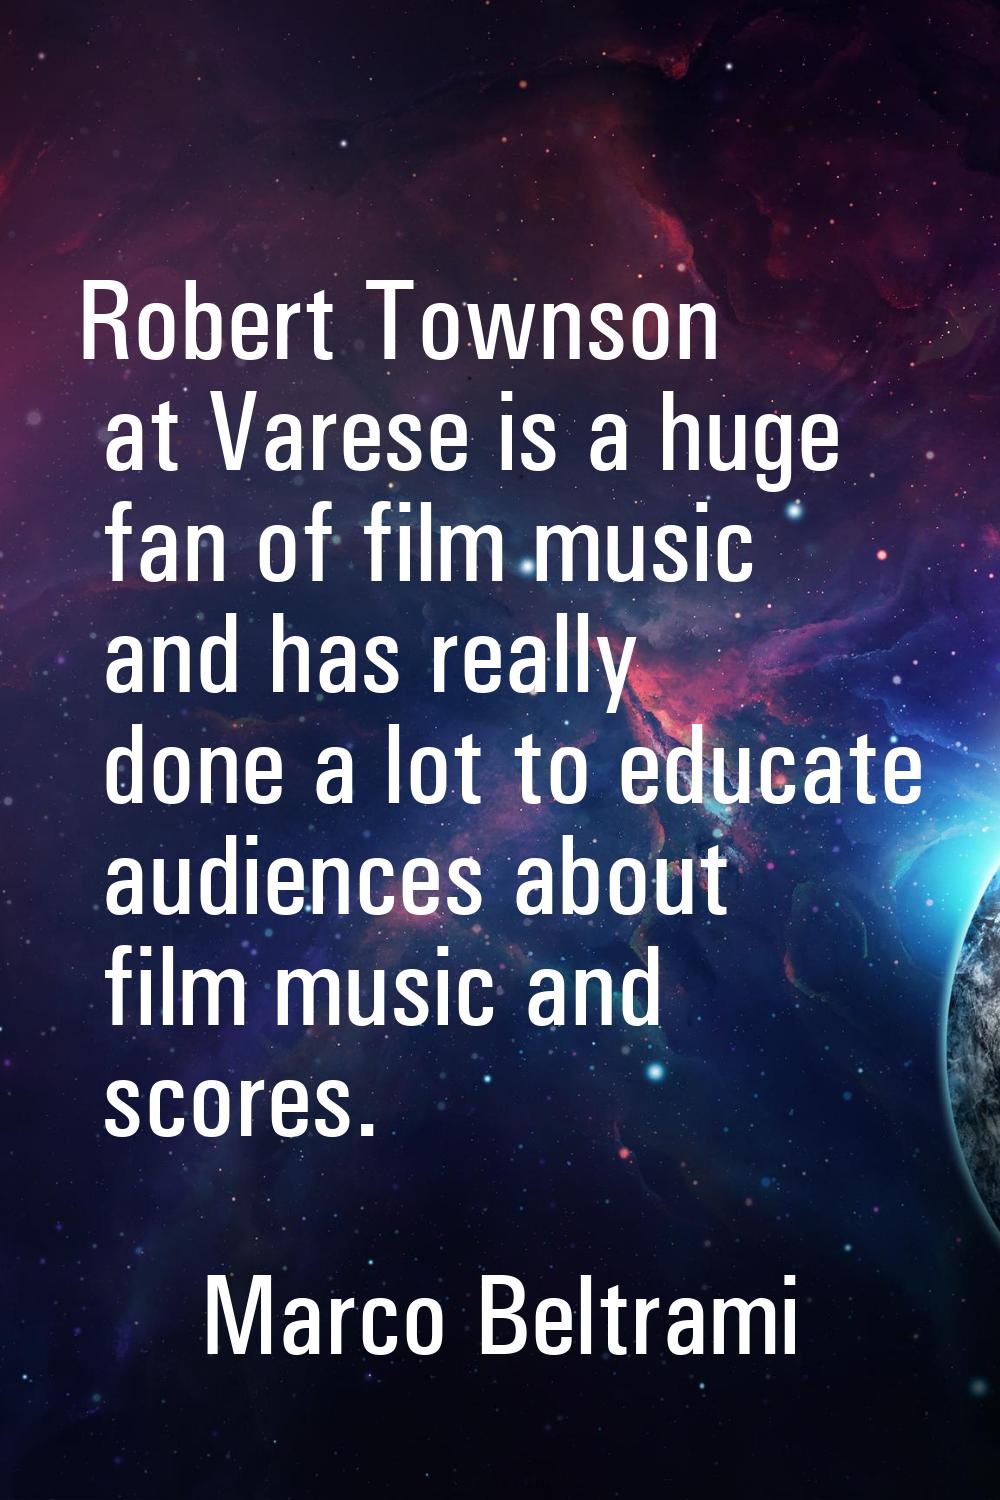 Robert Townson at Varese is a huge fan of film music and has really done a lot to educate audiences